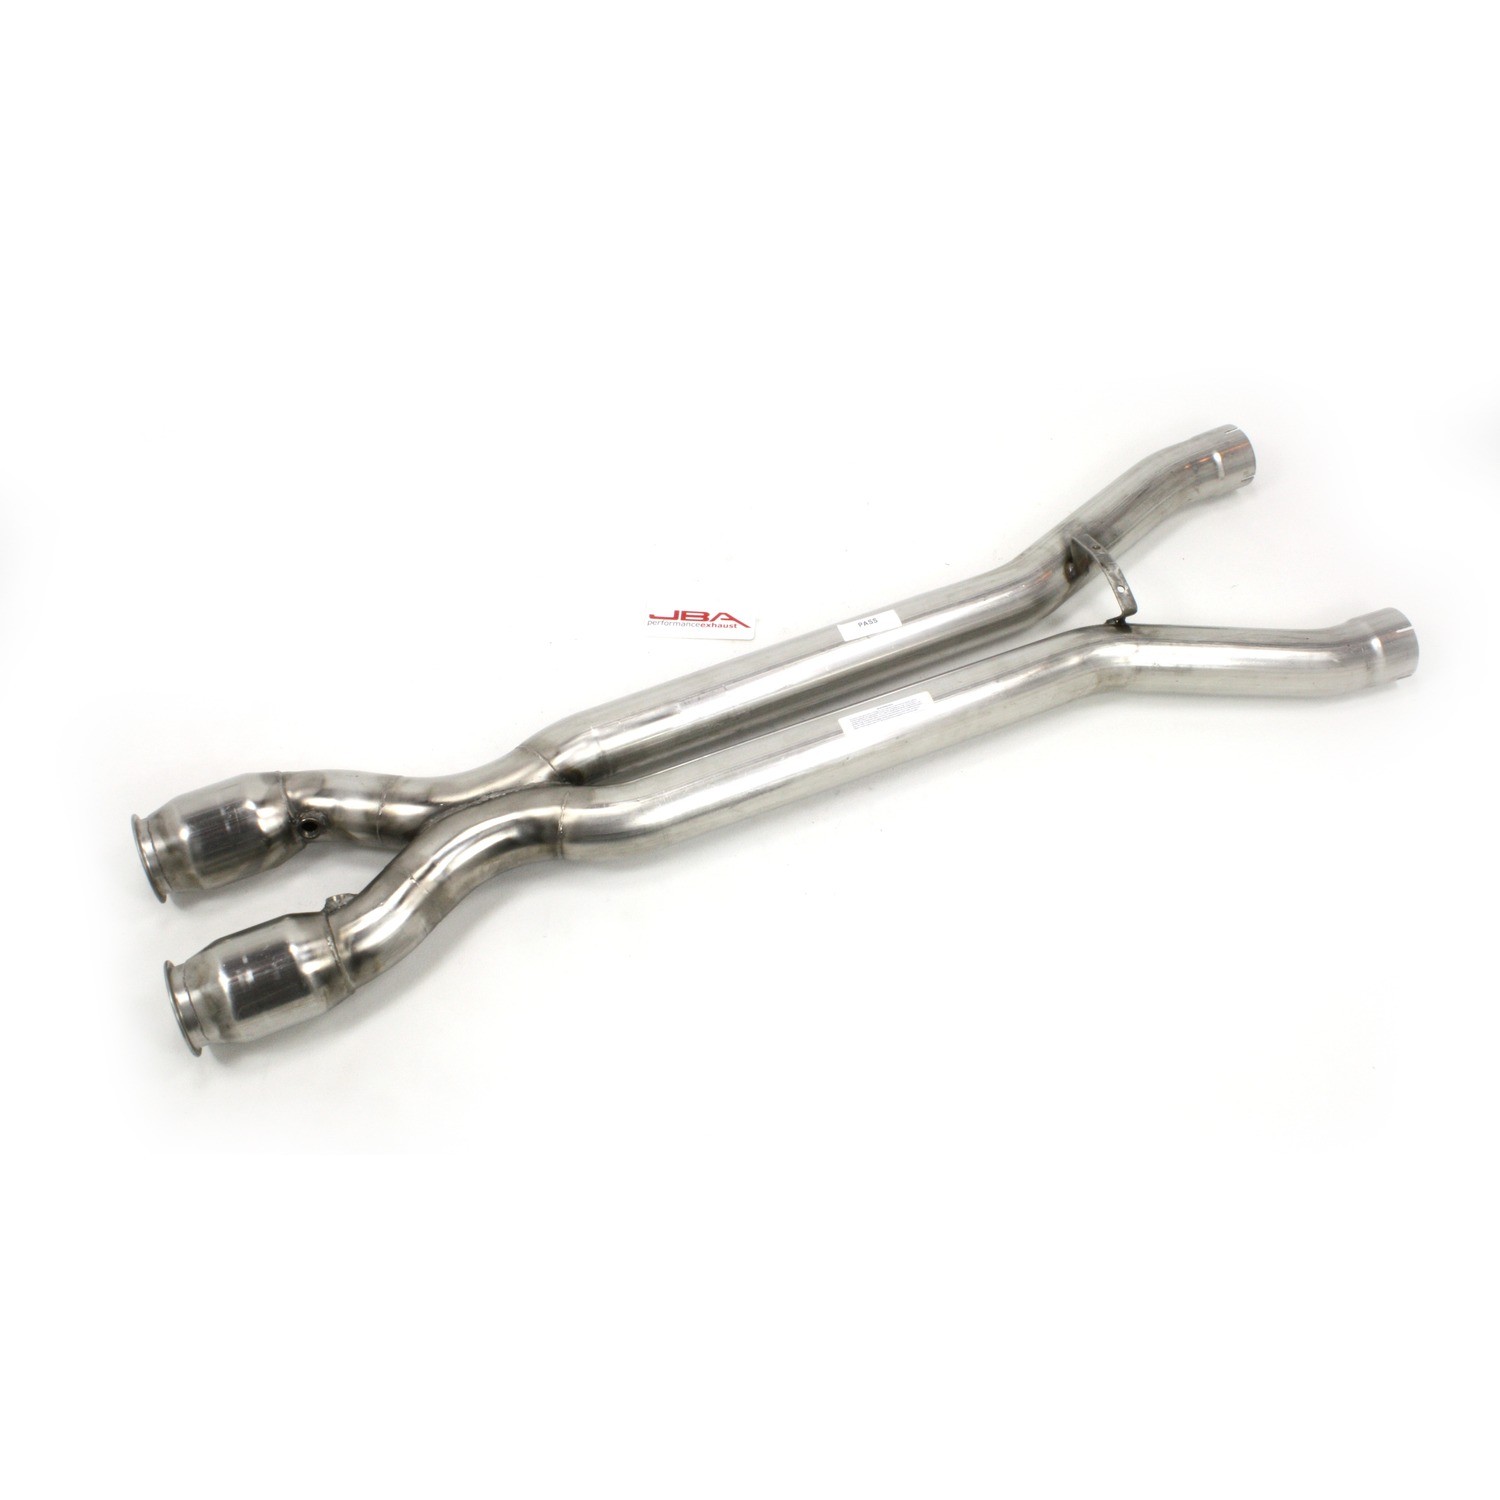 C7 Corvette 6.2L LT1/4 304 Stainless Steel X-Pipe with Cats, JBA